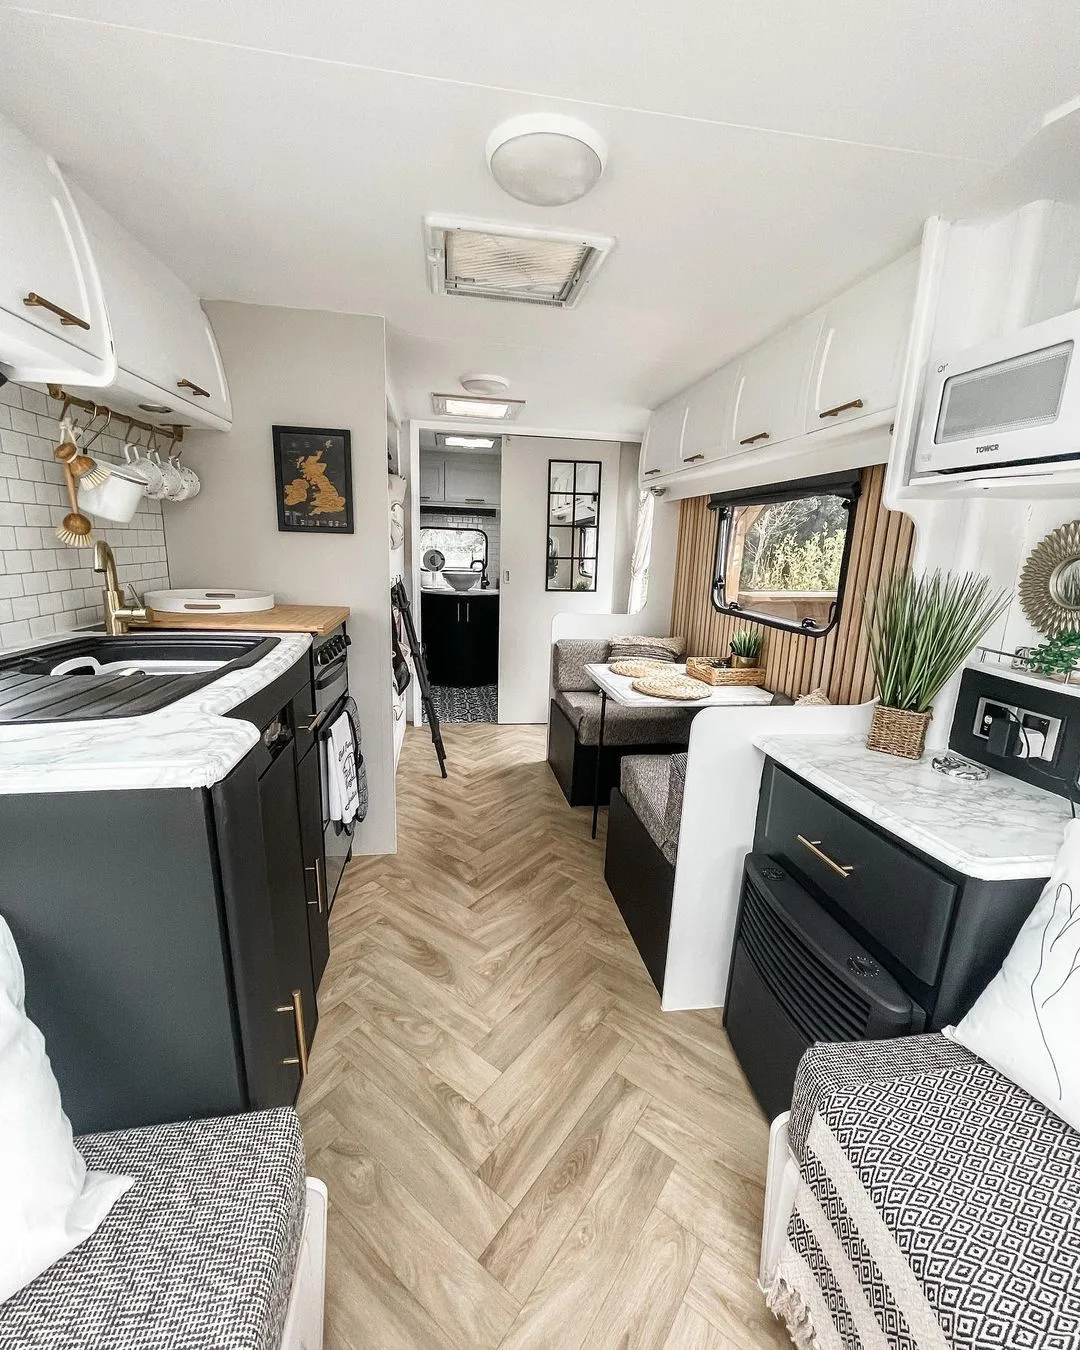 Interior of a renovated caravan with black cabinets and neutral decor.